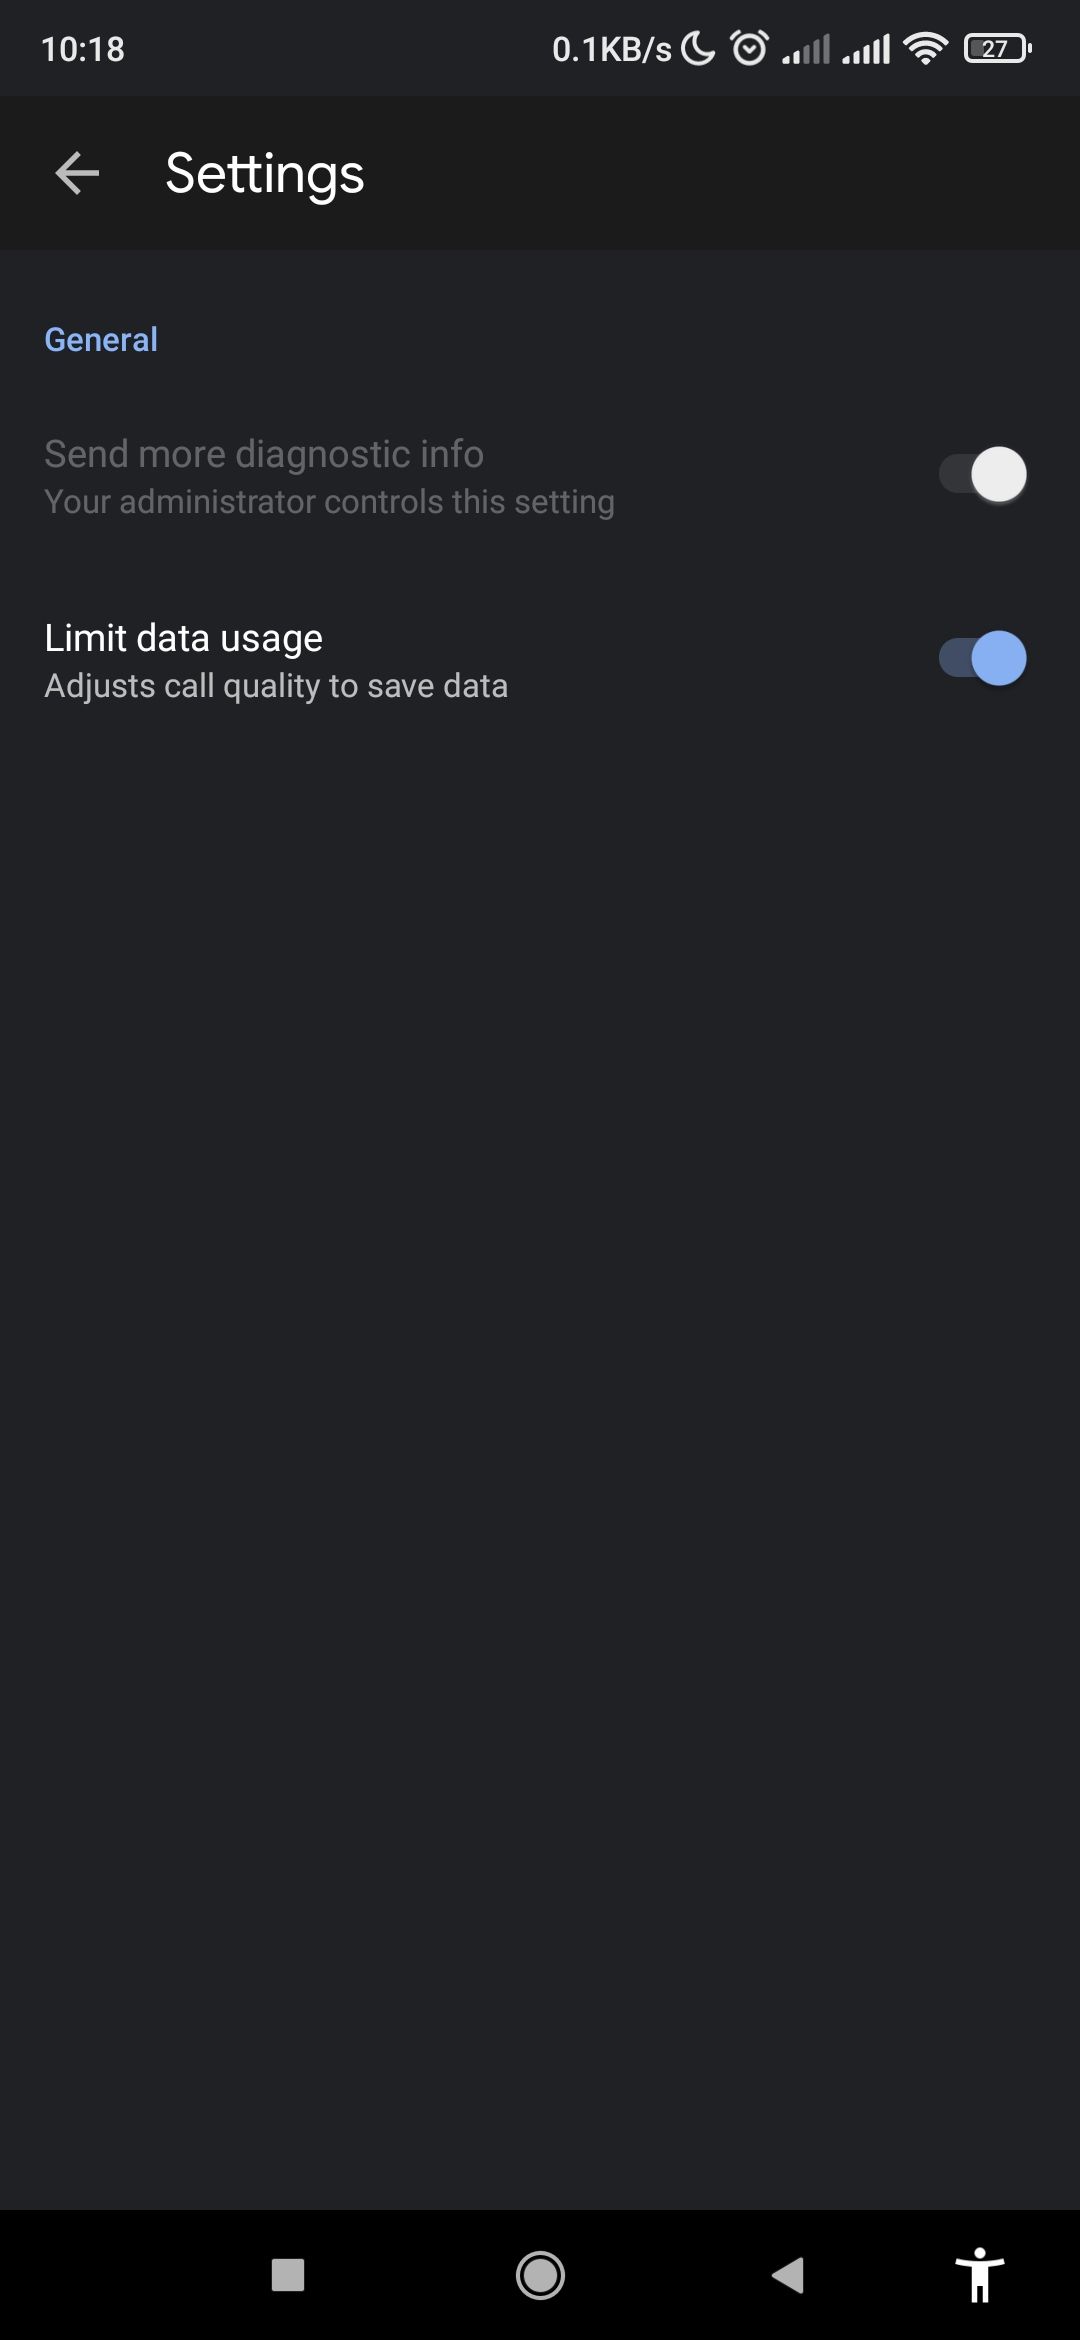 Limit data usage setting enabled in Google Meet